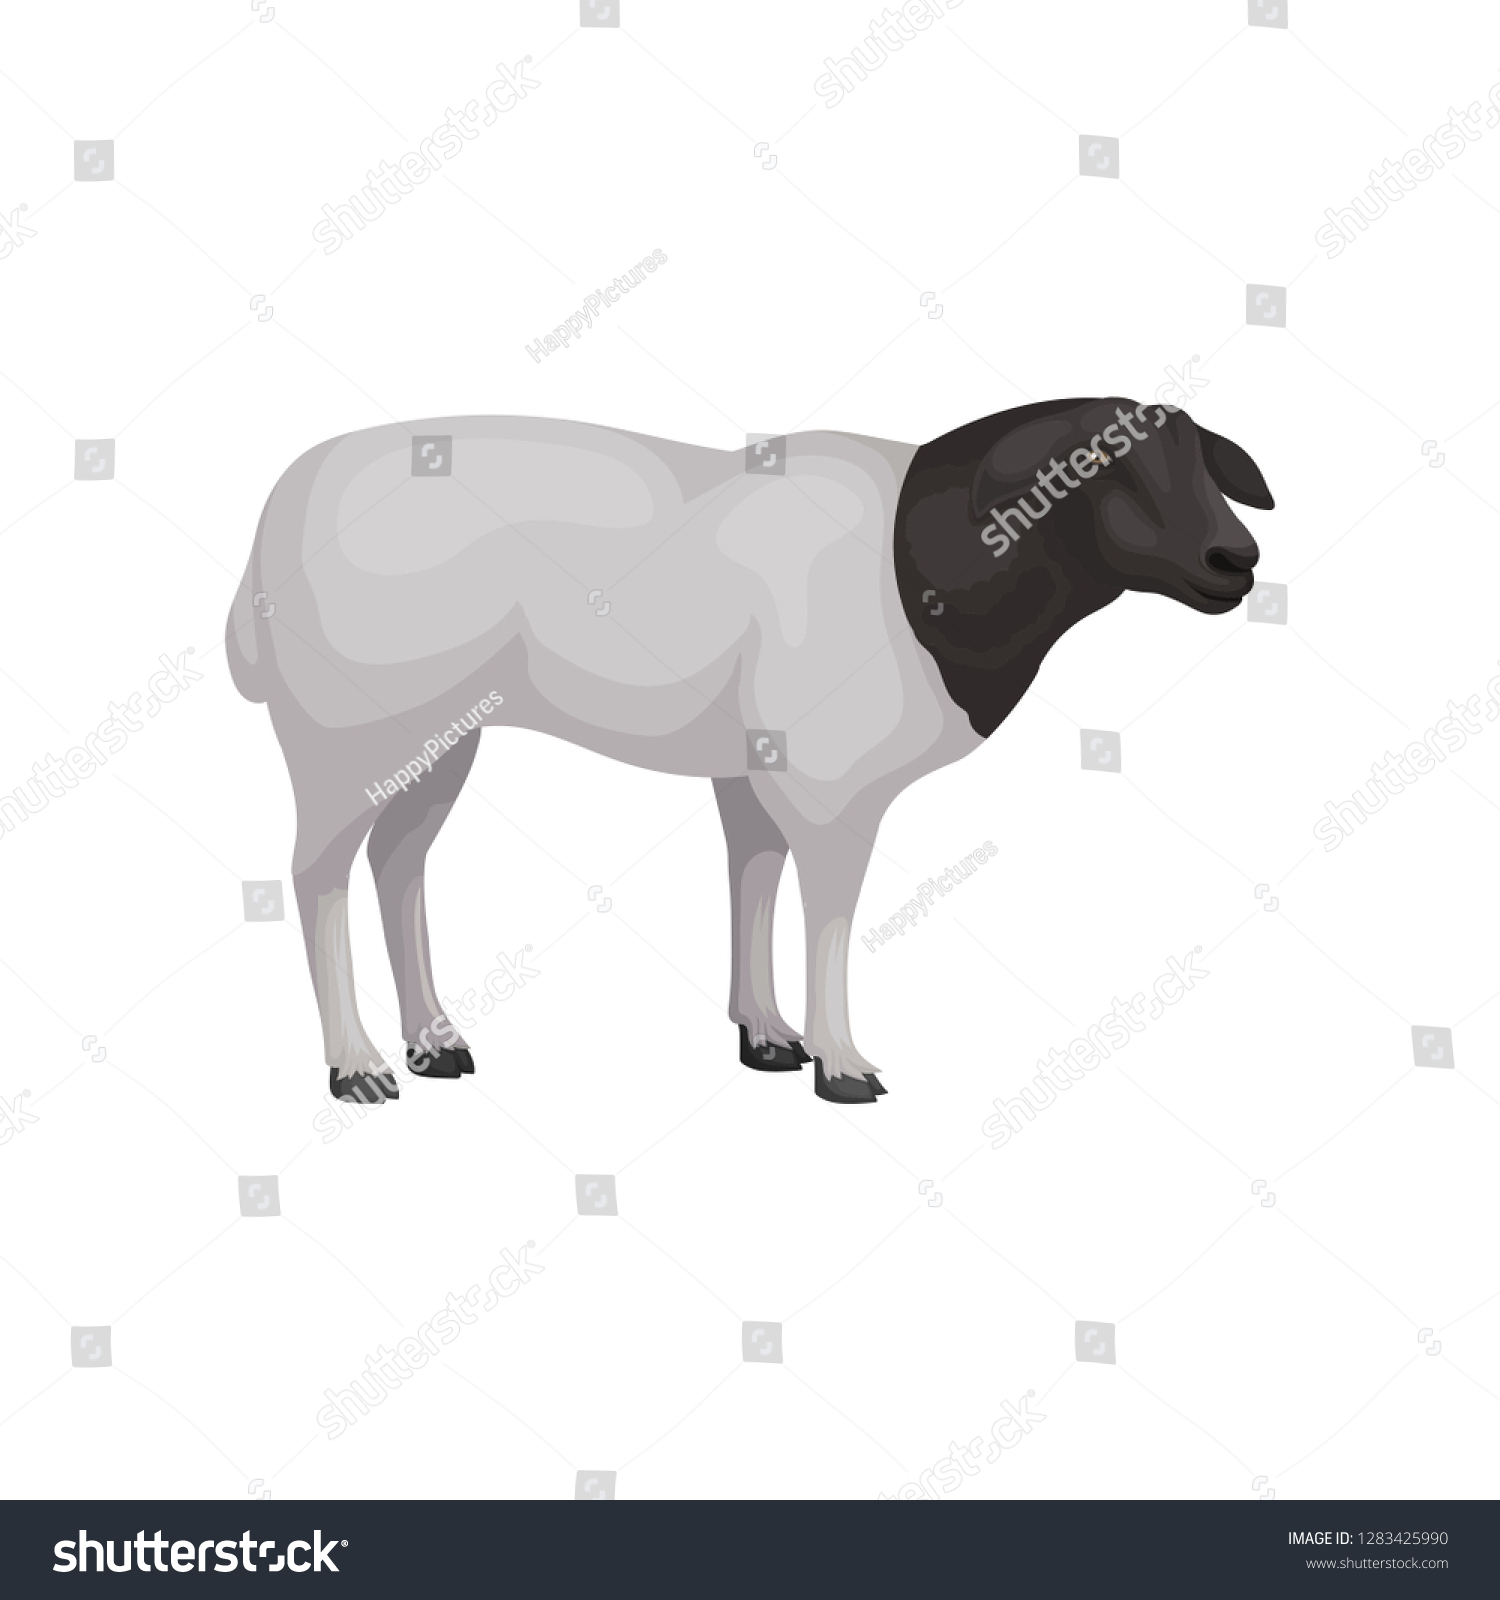 SVG of Flat vector icon of young dorper sheep. Farm animal with white coat and black head. Livestock farming svg